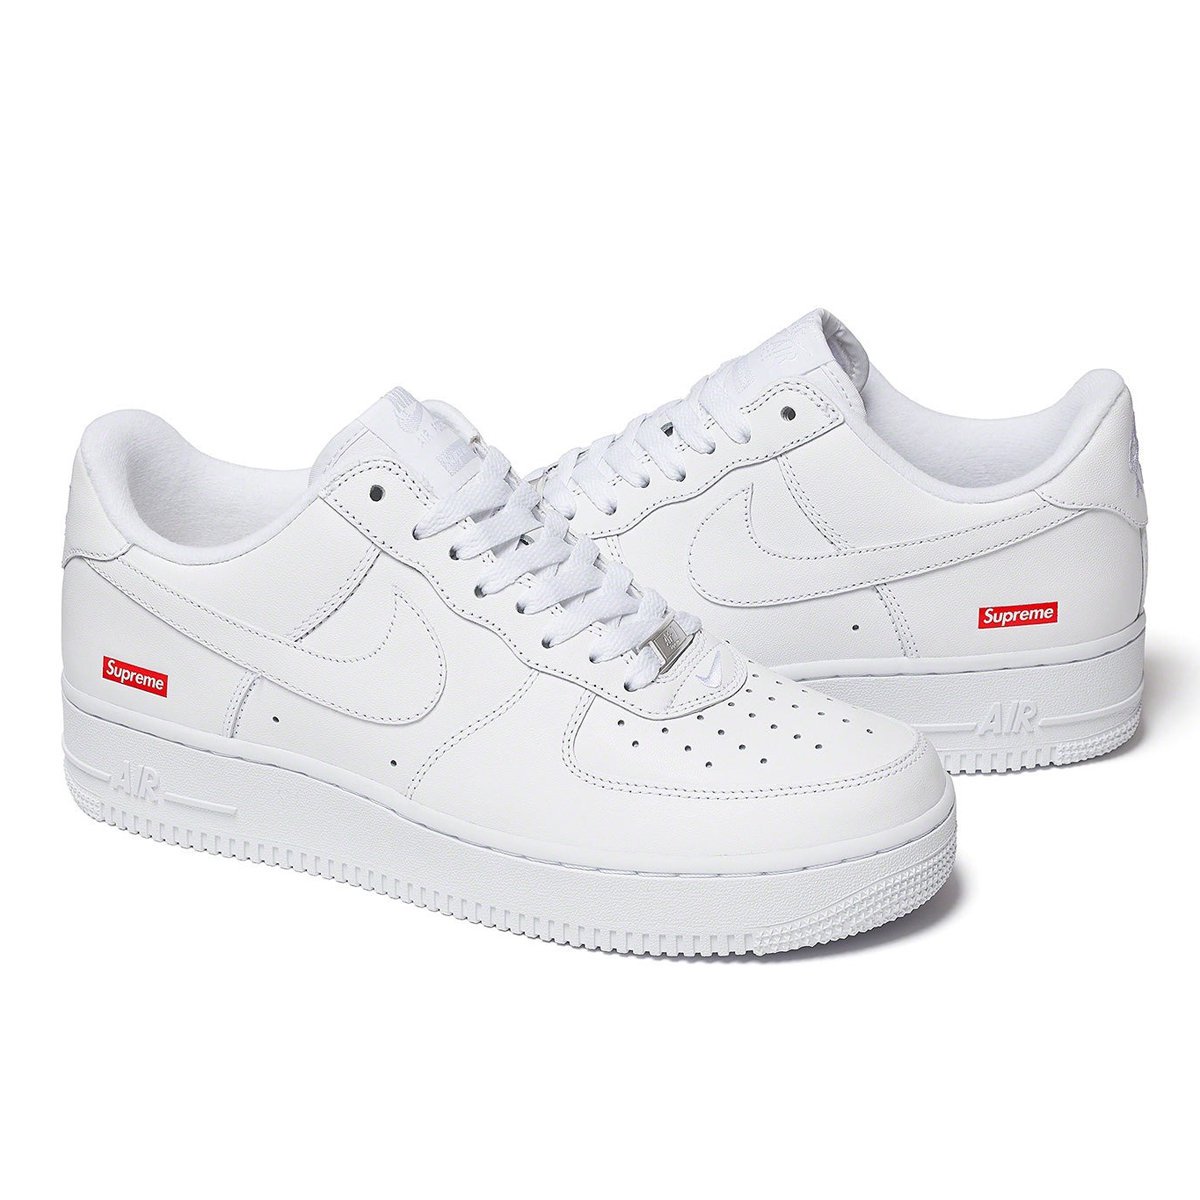 snkrs【新品】SUPREME NIKE AIR FORCE 1 LOW 24.0㎝ 白